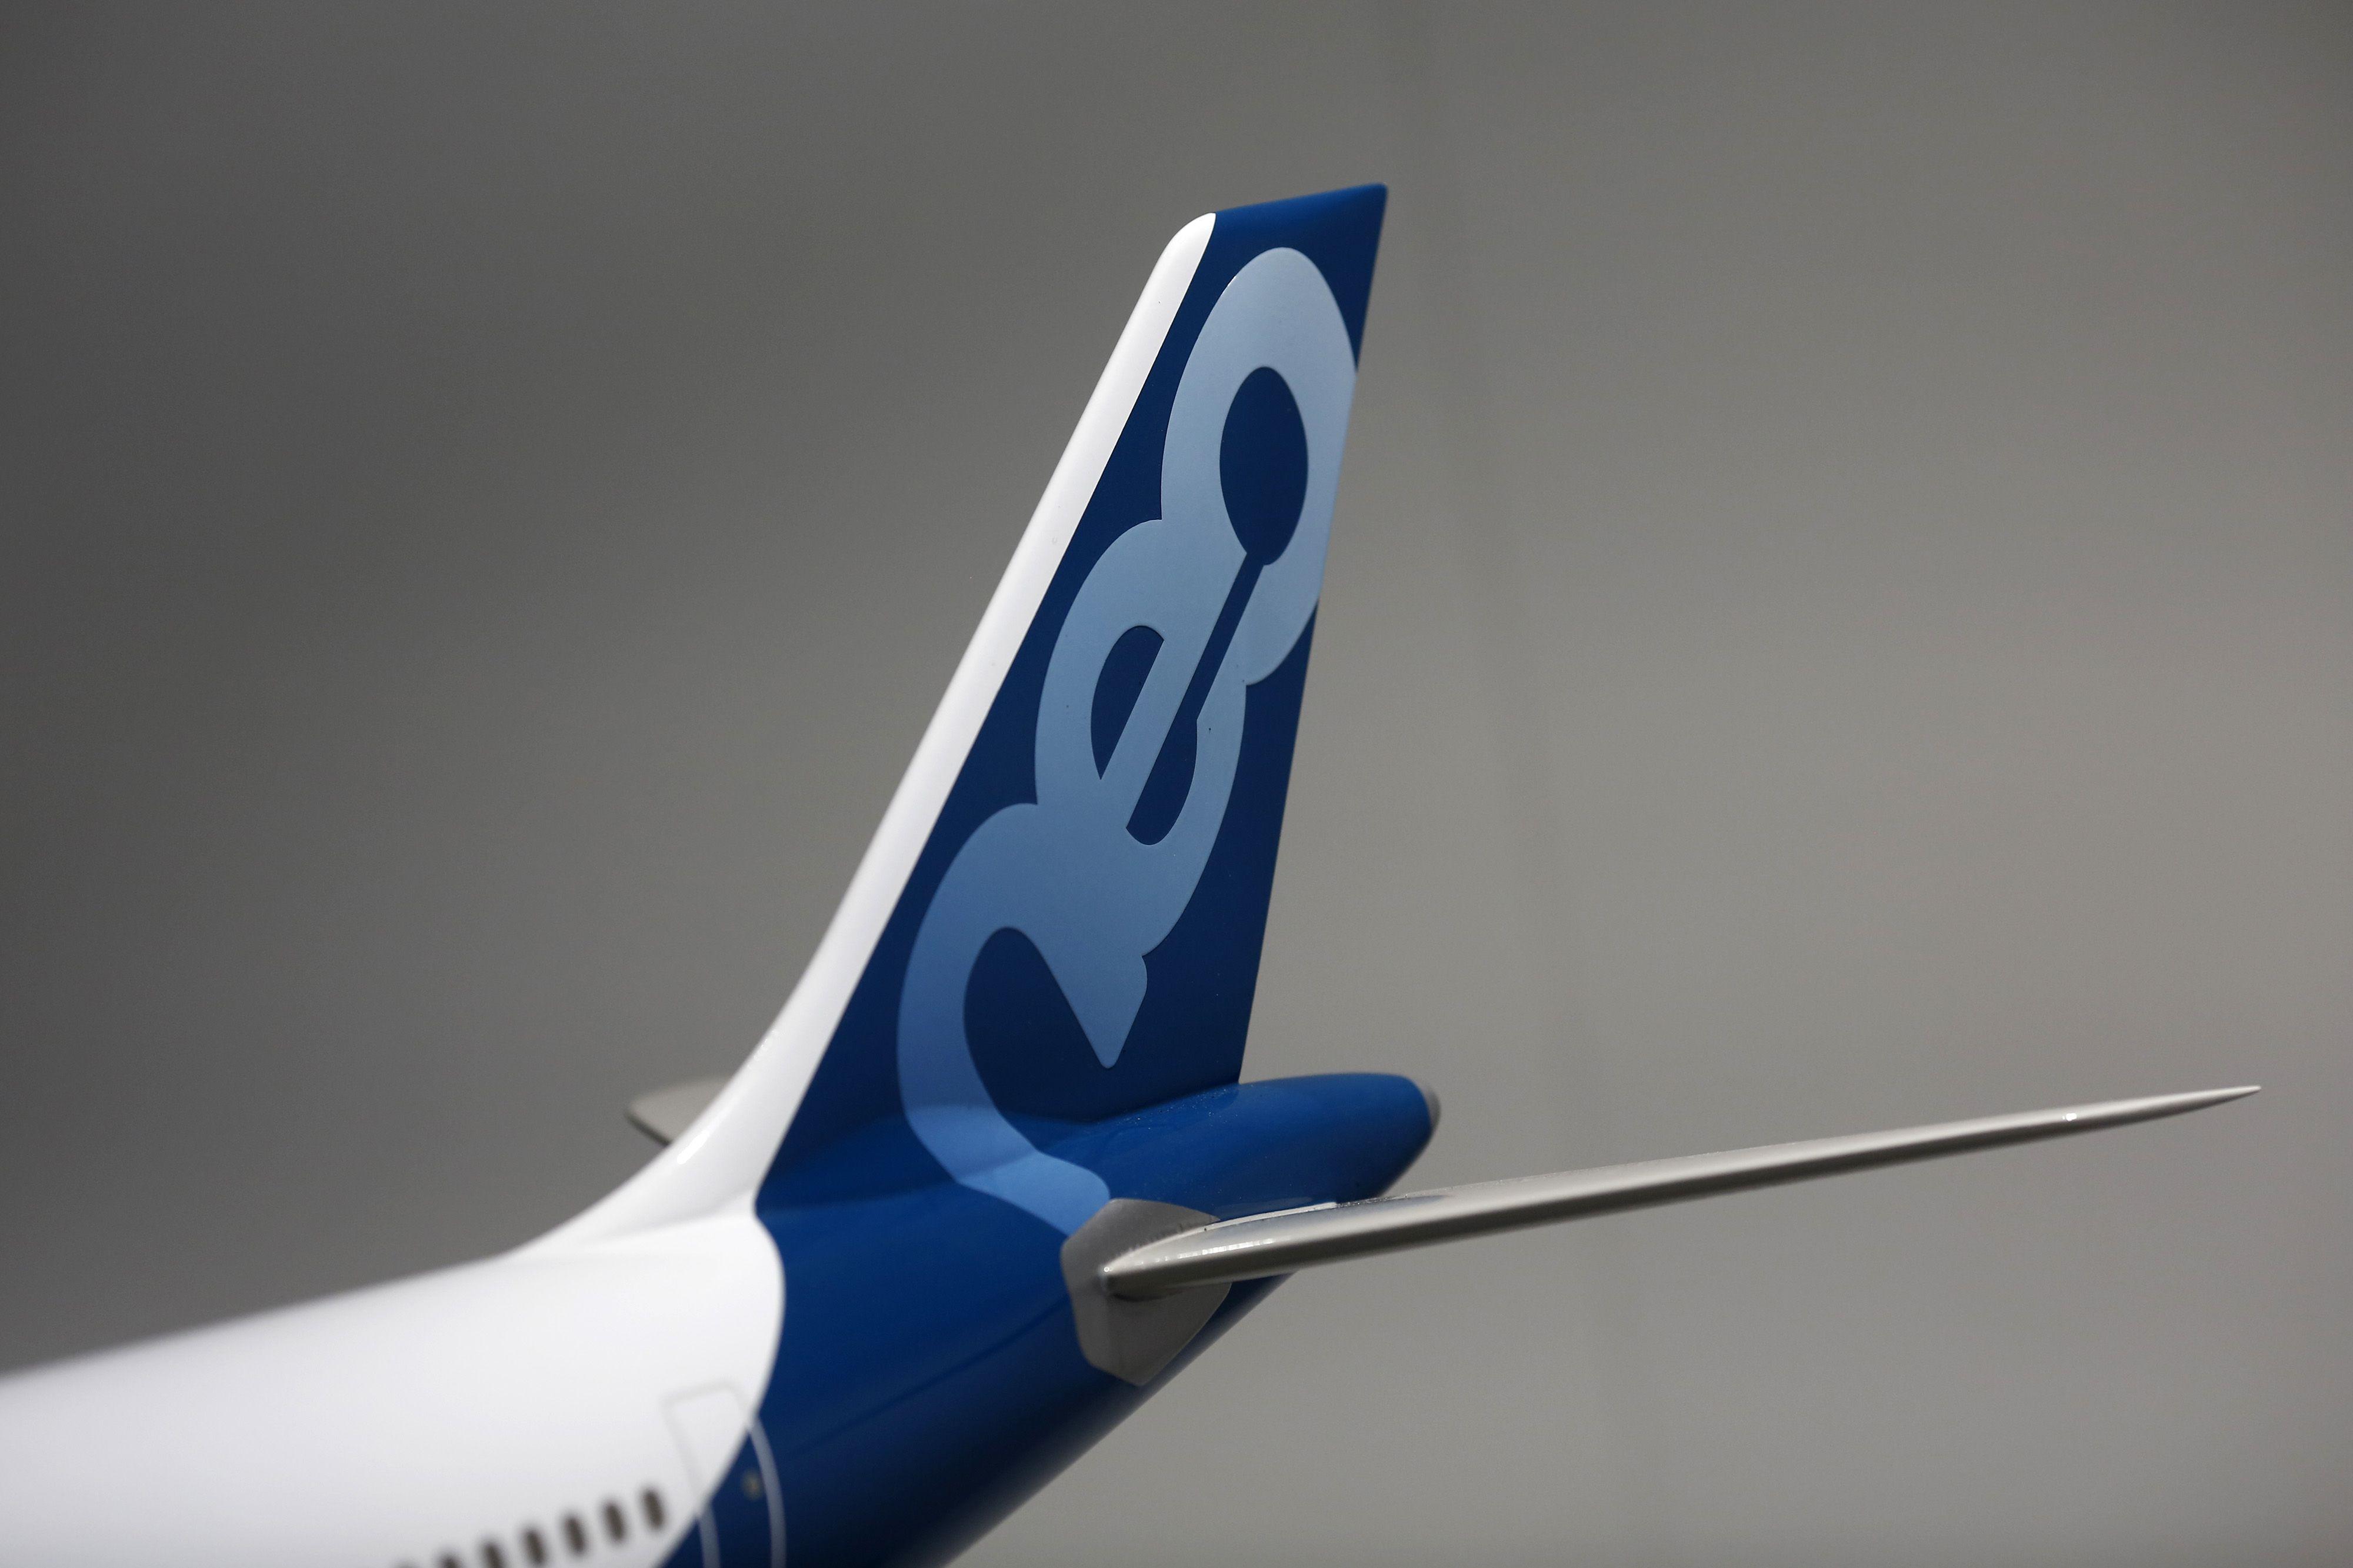 A330neo Logo - Airbus locks up big sale of new plane | Fortune